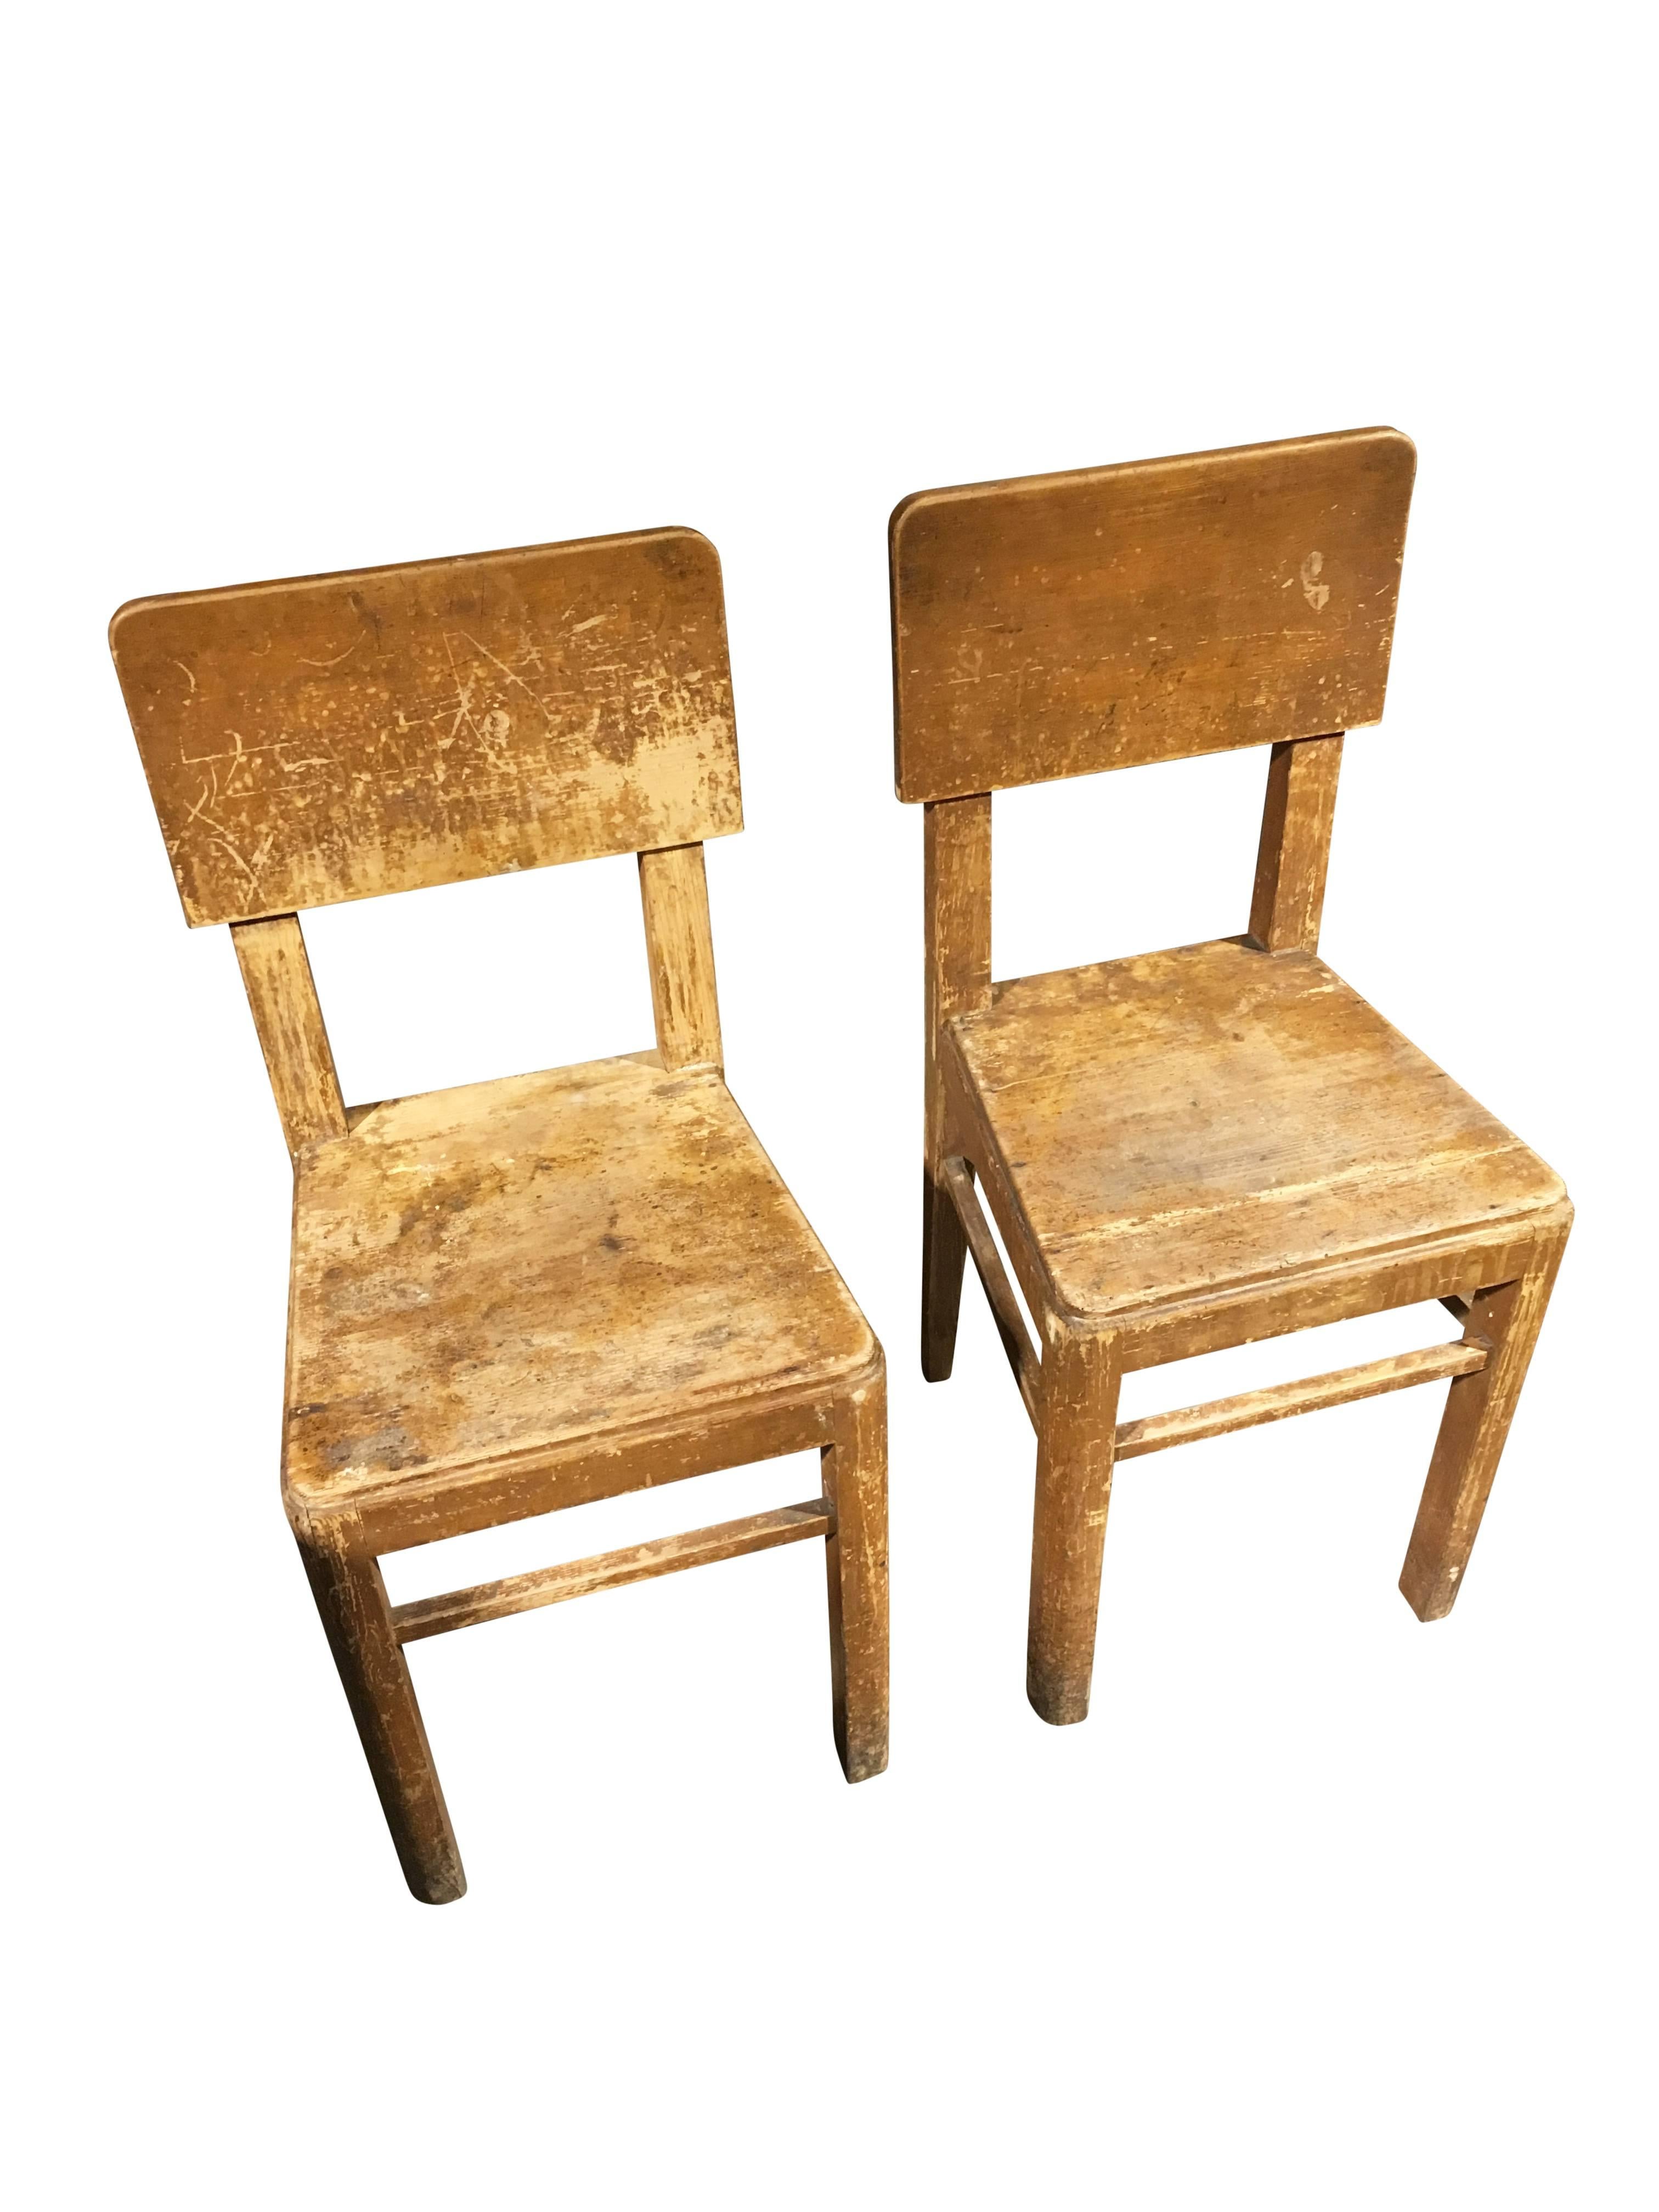 Pair of Primitive wooden chairs from Belgium in original color.